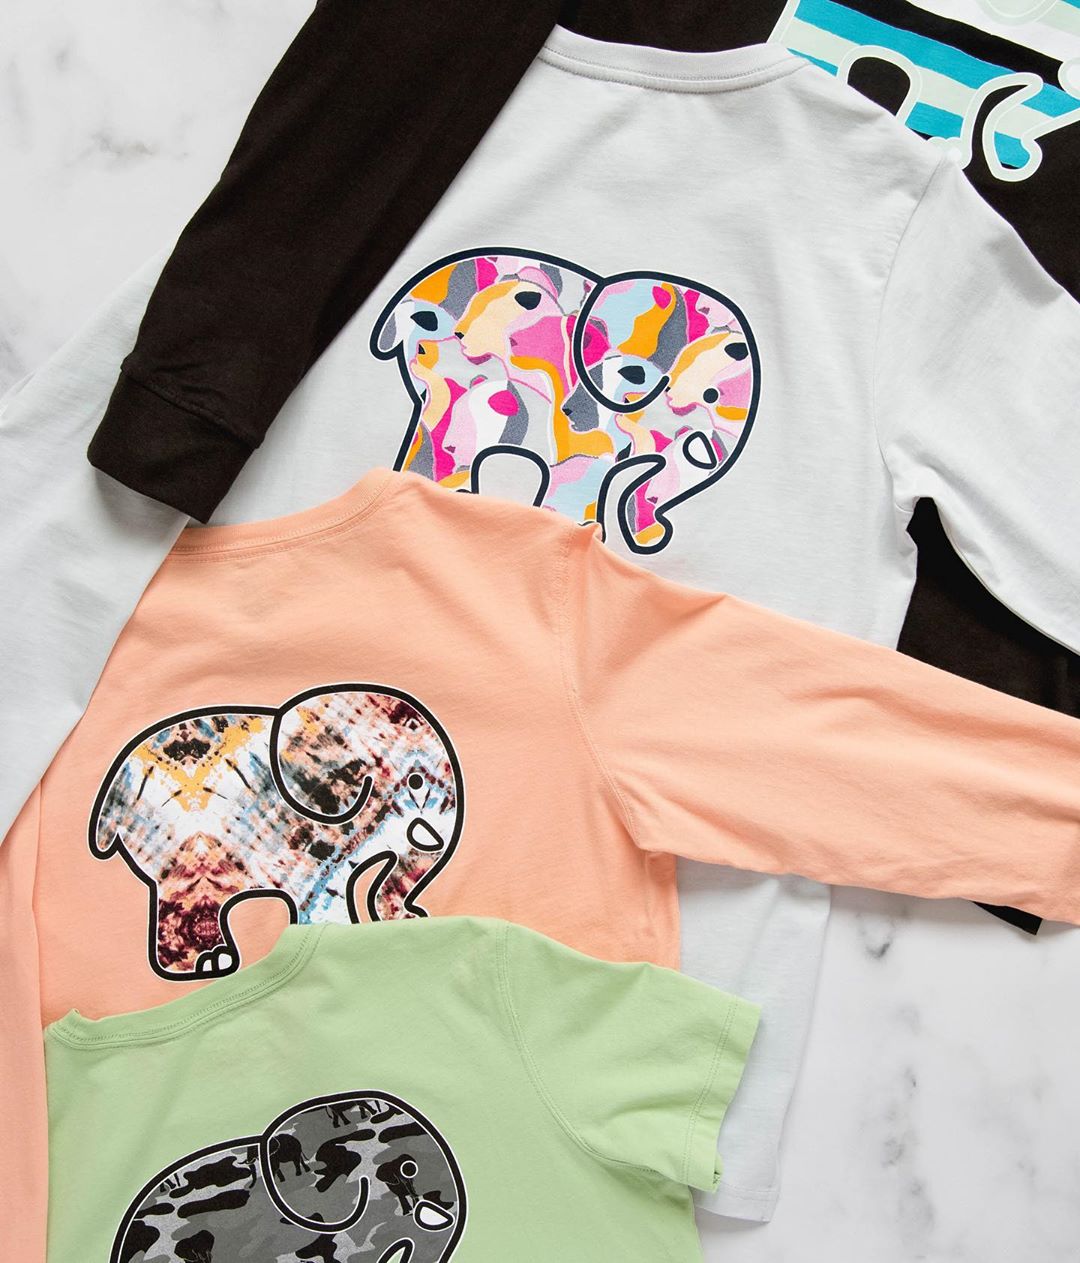 Ivory Ella - Did someone say 100% organic cotton? Our super soft long sleeve tees are made with only the best materials and lots of love 💖 Shop above. #IvoryElla #Fall2020 #GoingPlaces